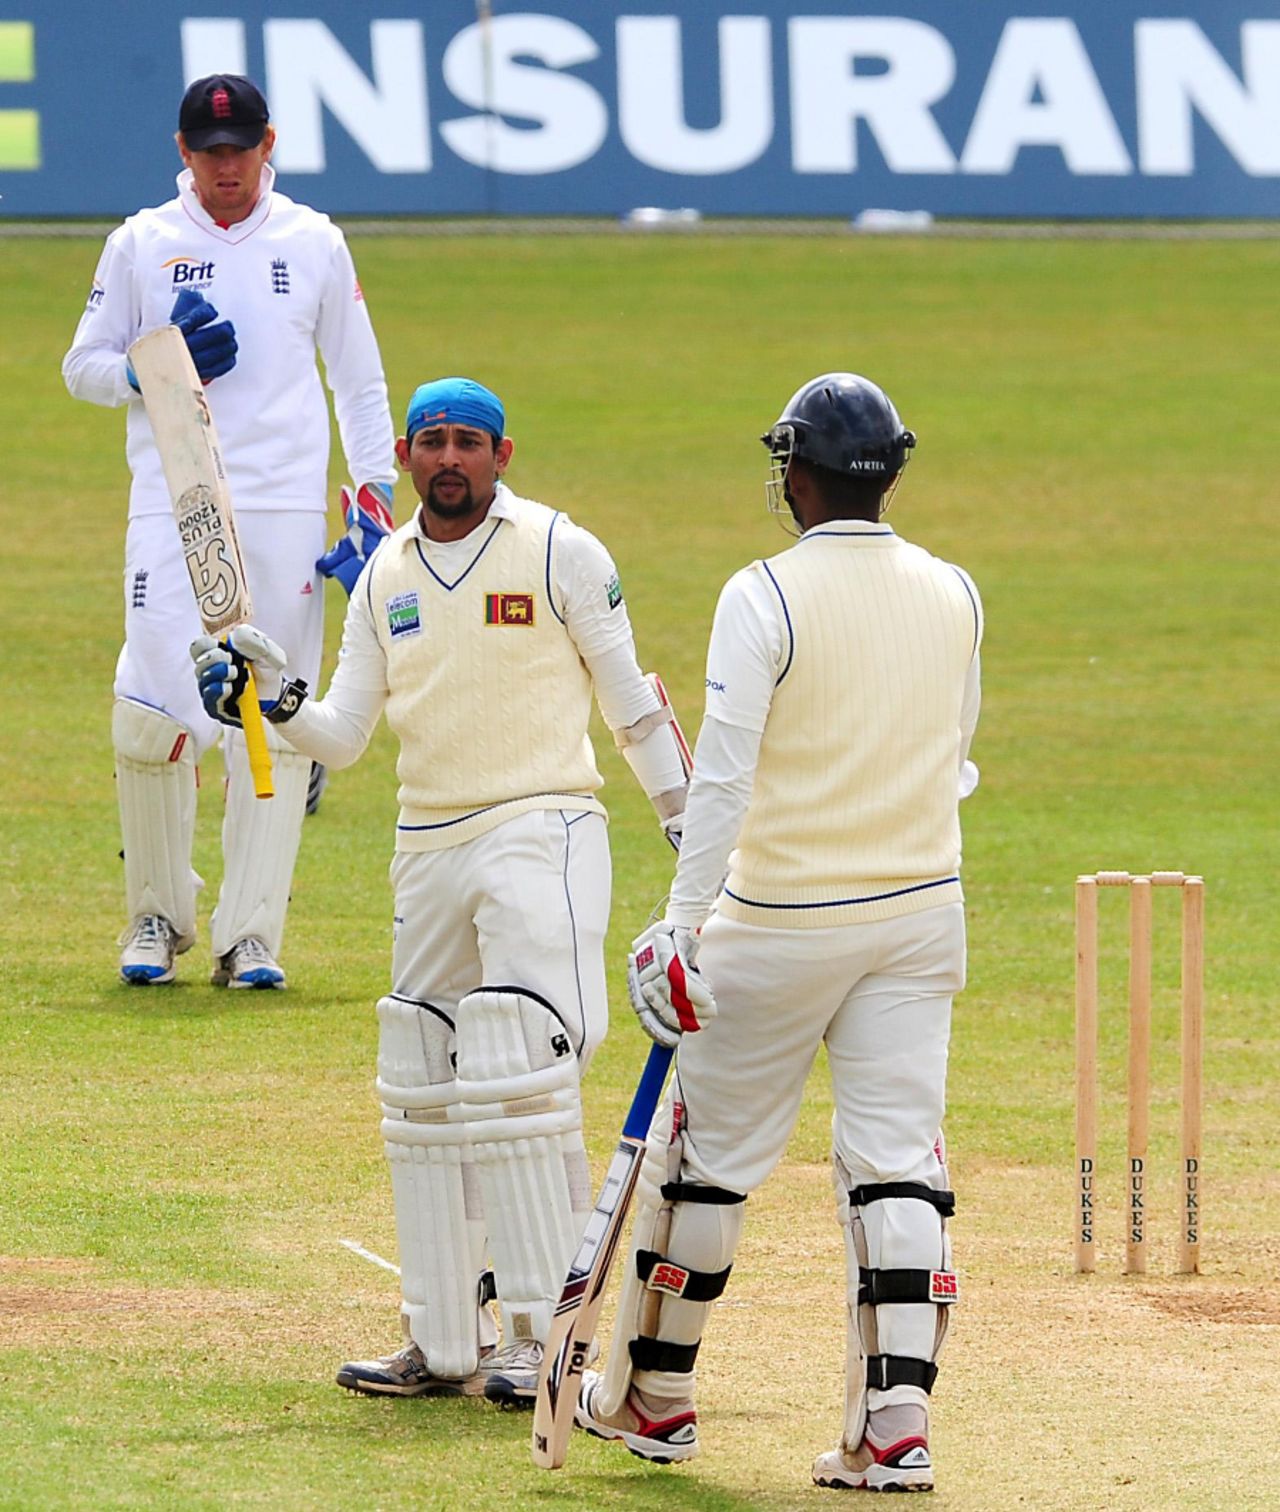 Tillakaratne Dilshan reached his second century of Sri Lanka's tour against England Lions, England Lions v Sri Lankans, Tour match, Derby, May 21, 2011